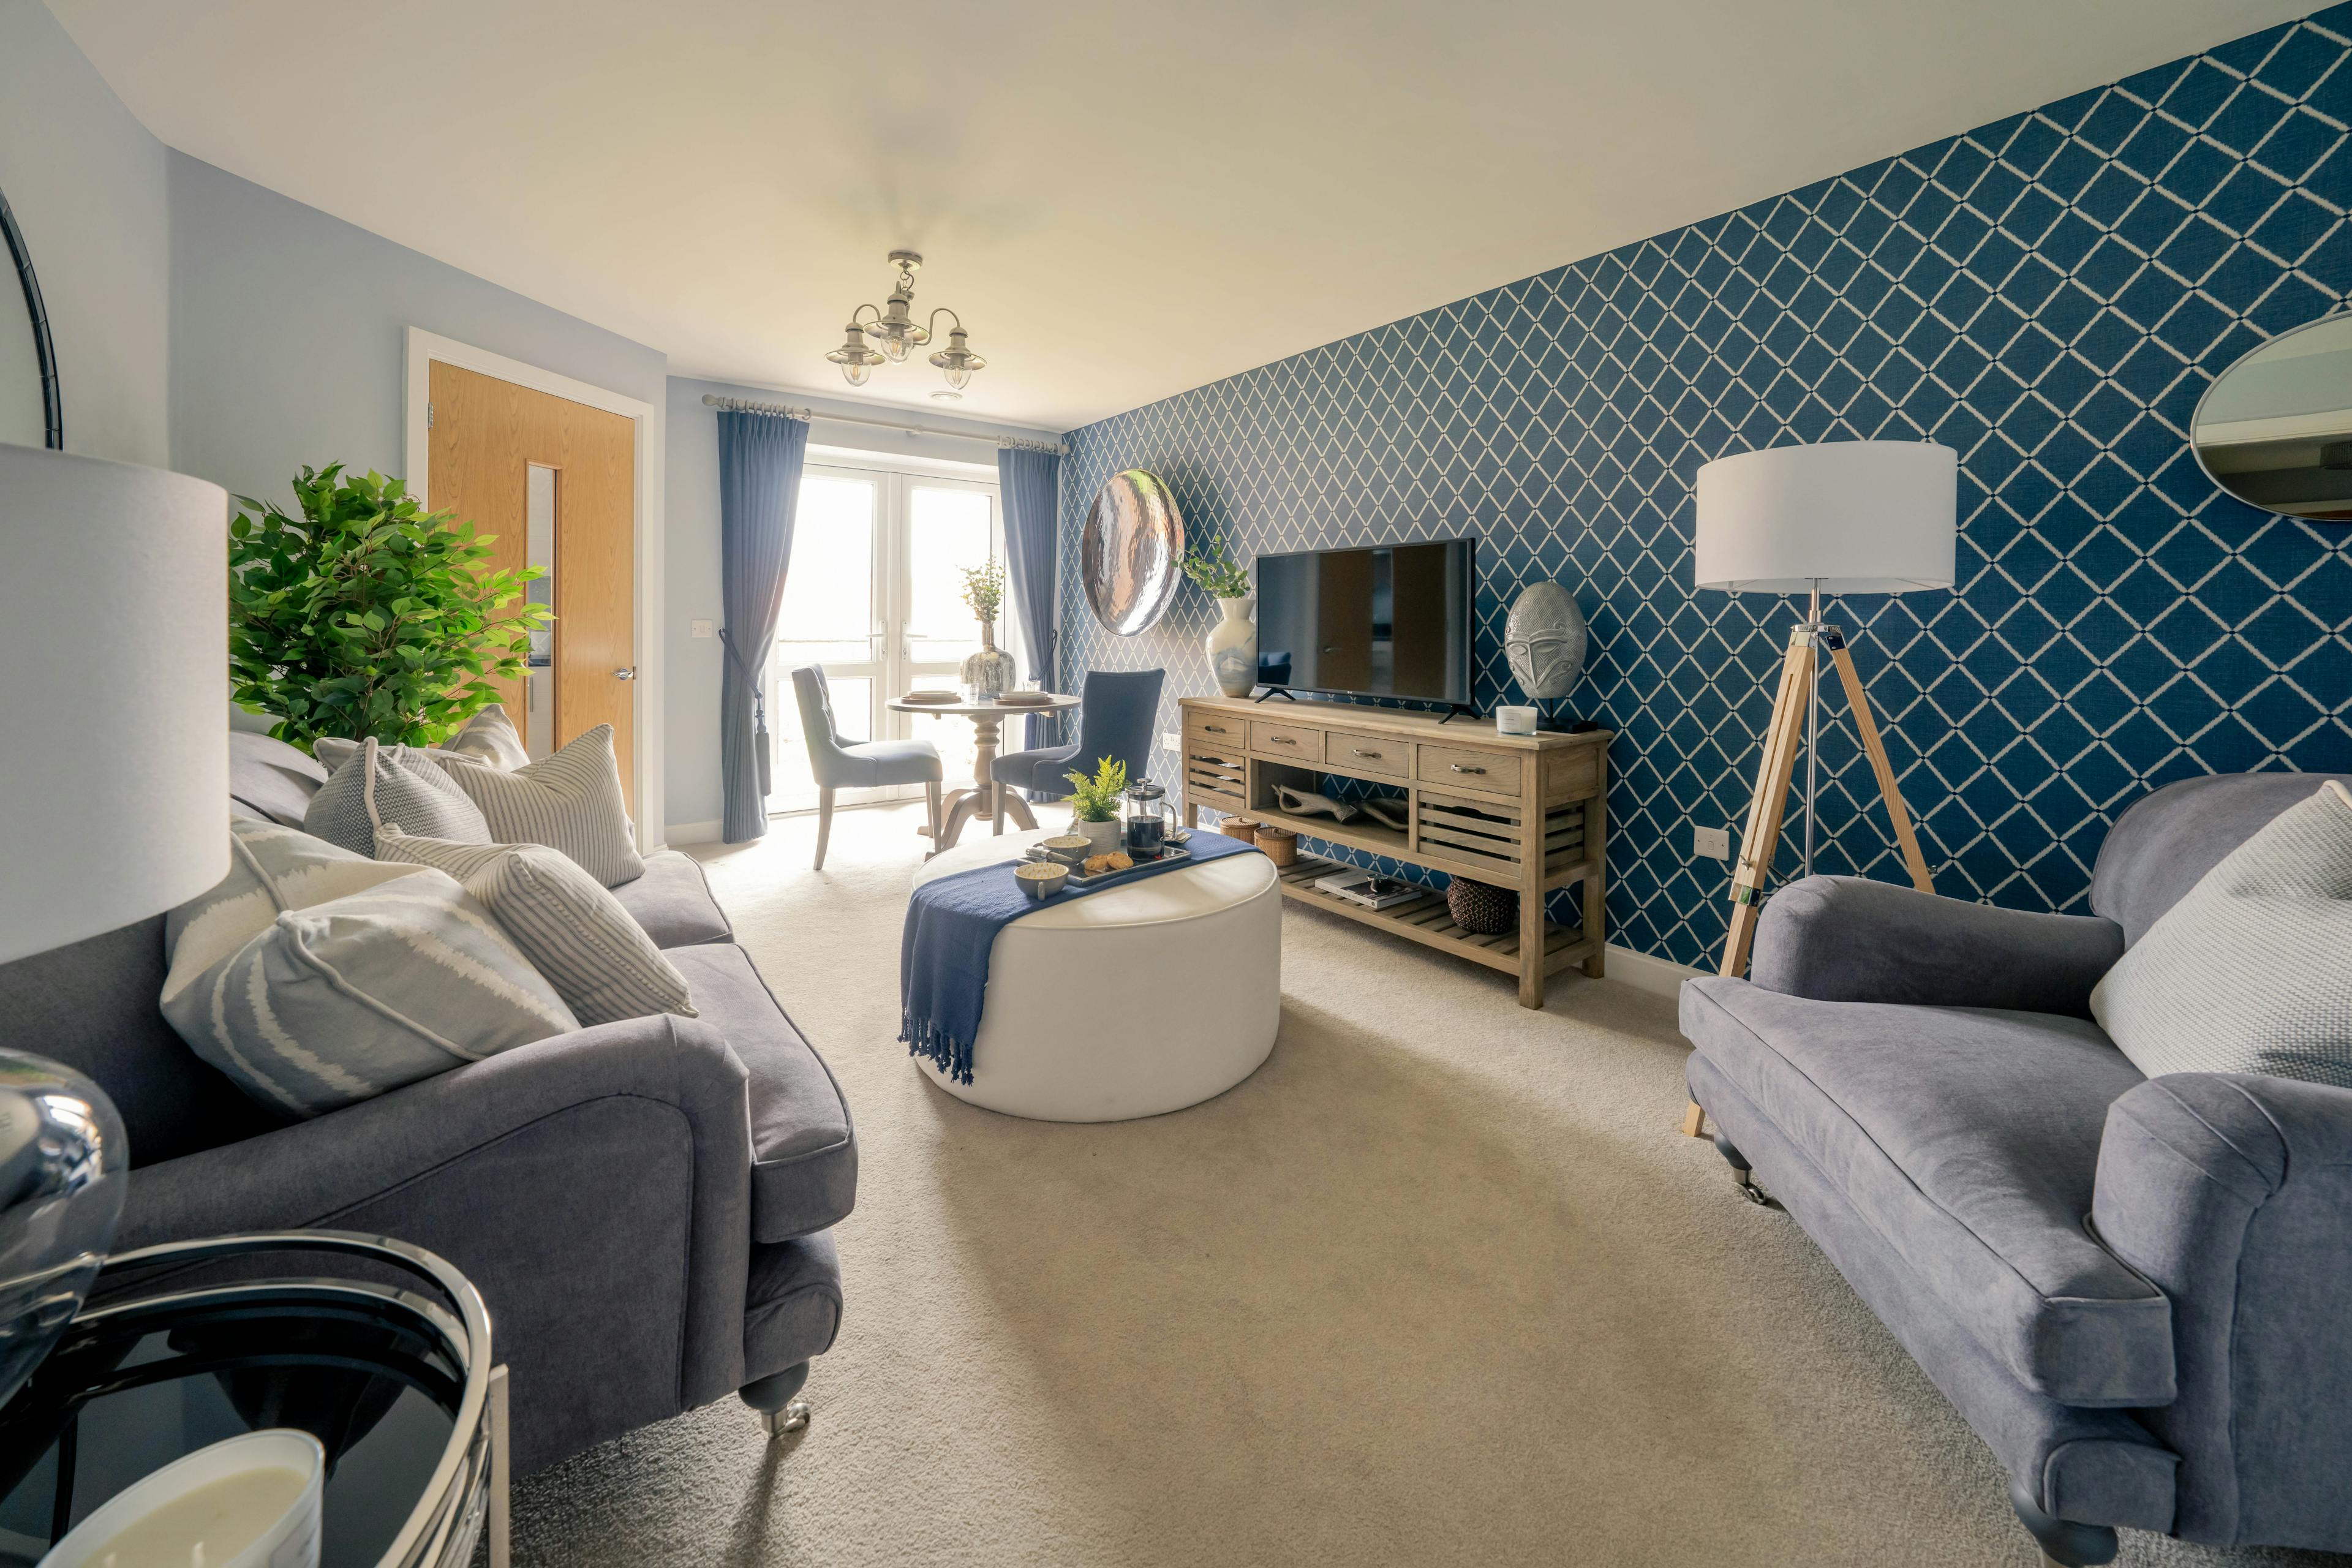 Living Room at Browning Court Retirement Development in Newcastle-upon-Tyne, Tyne and Wear